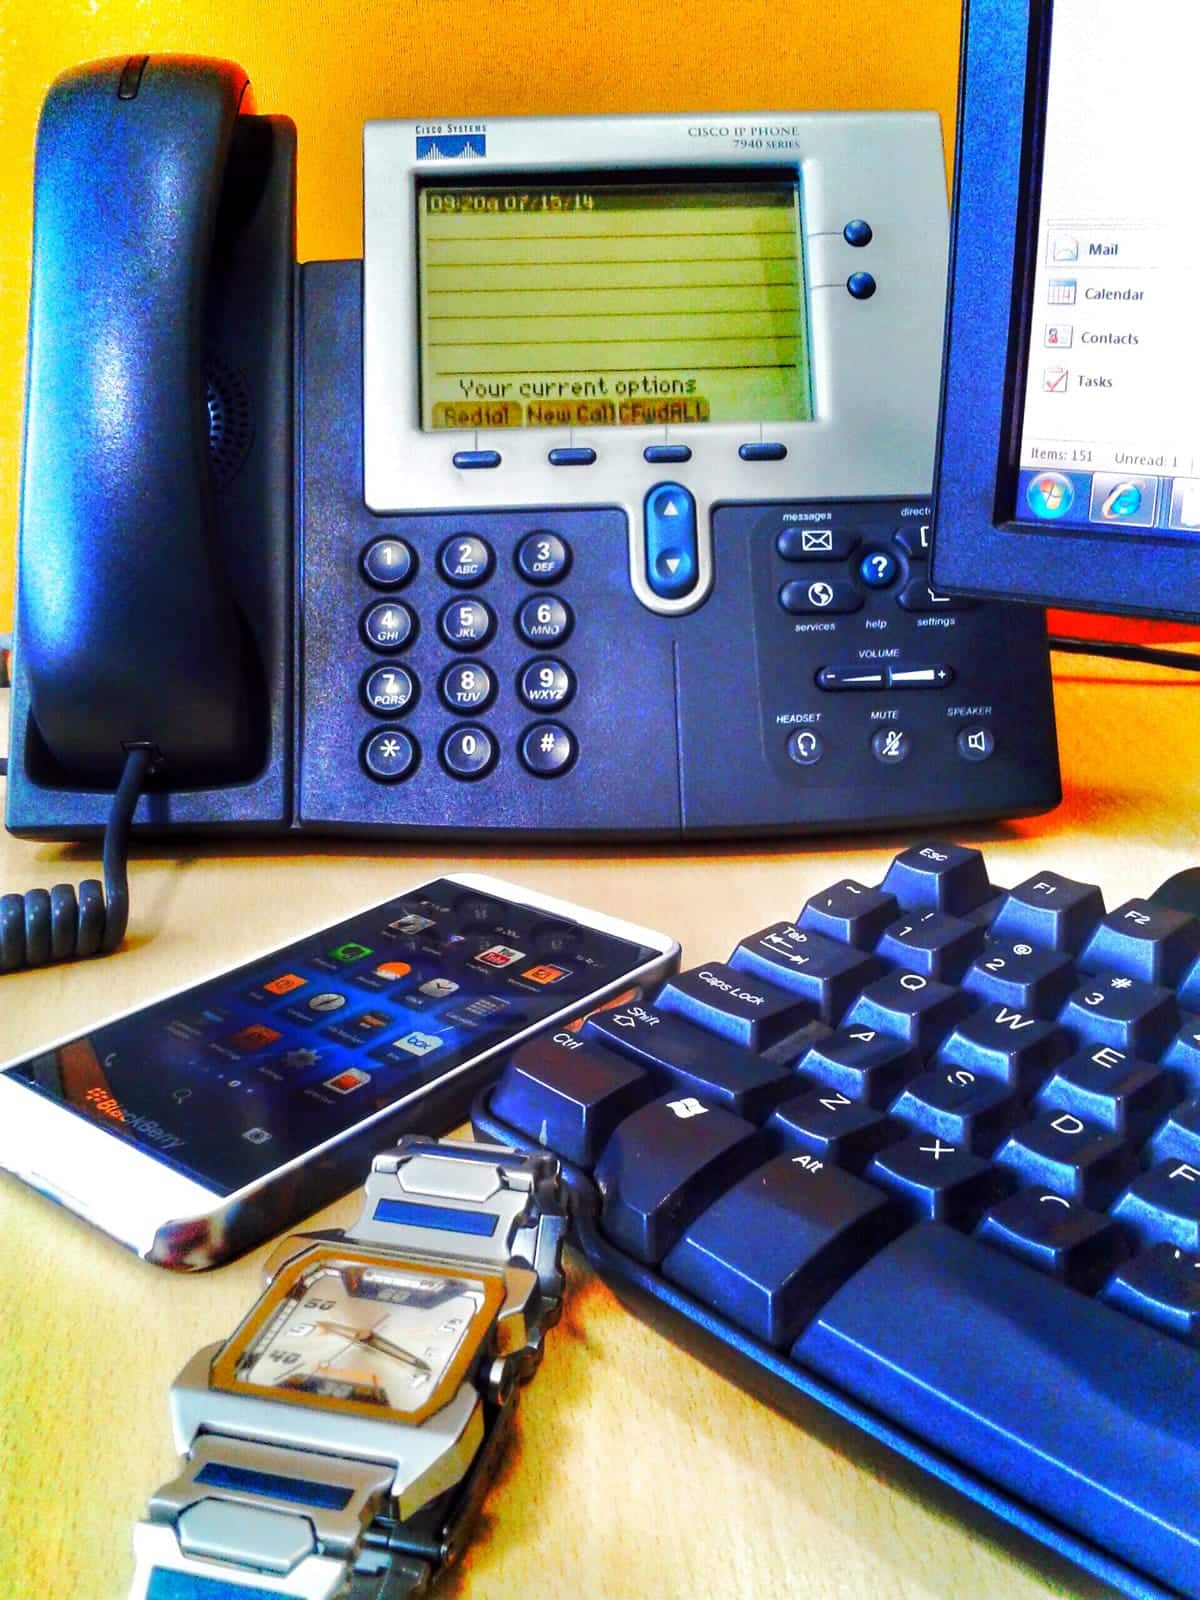 A smartphone, watch, computer and office phone on a desk.